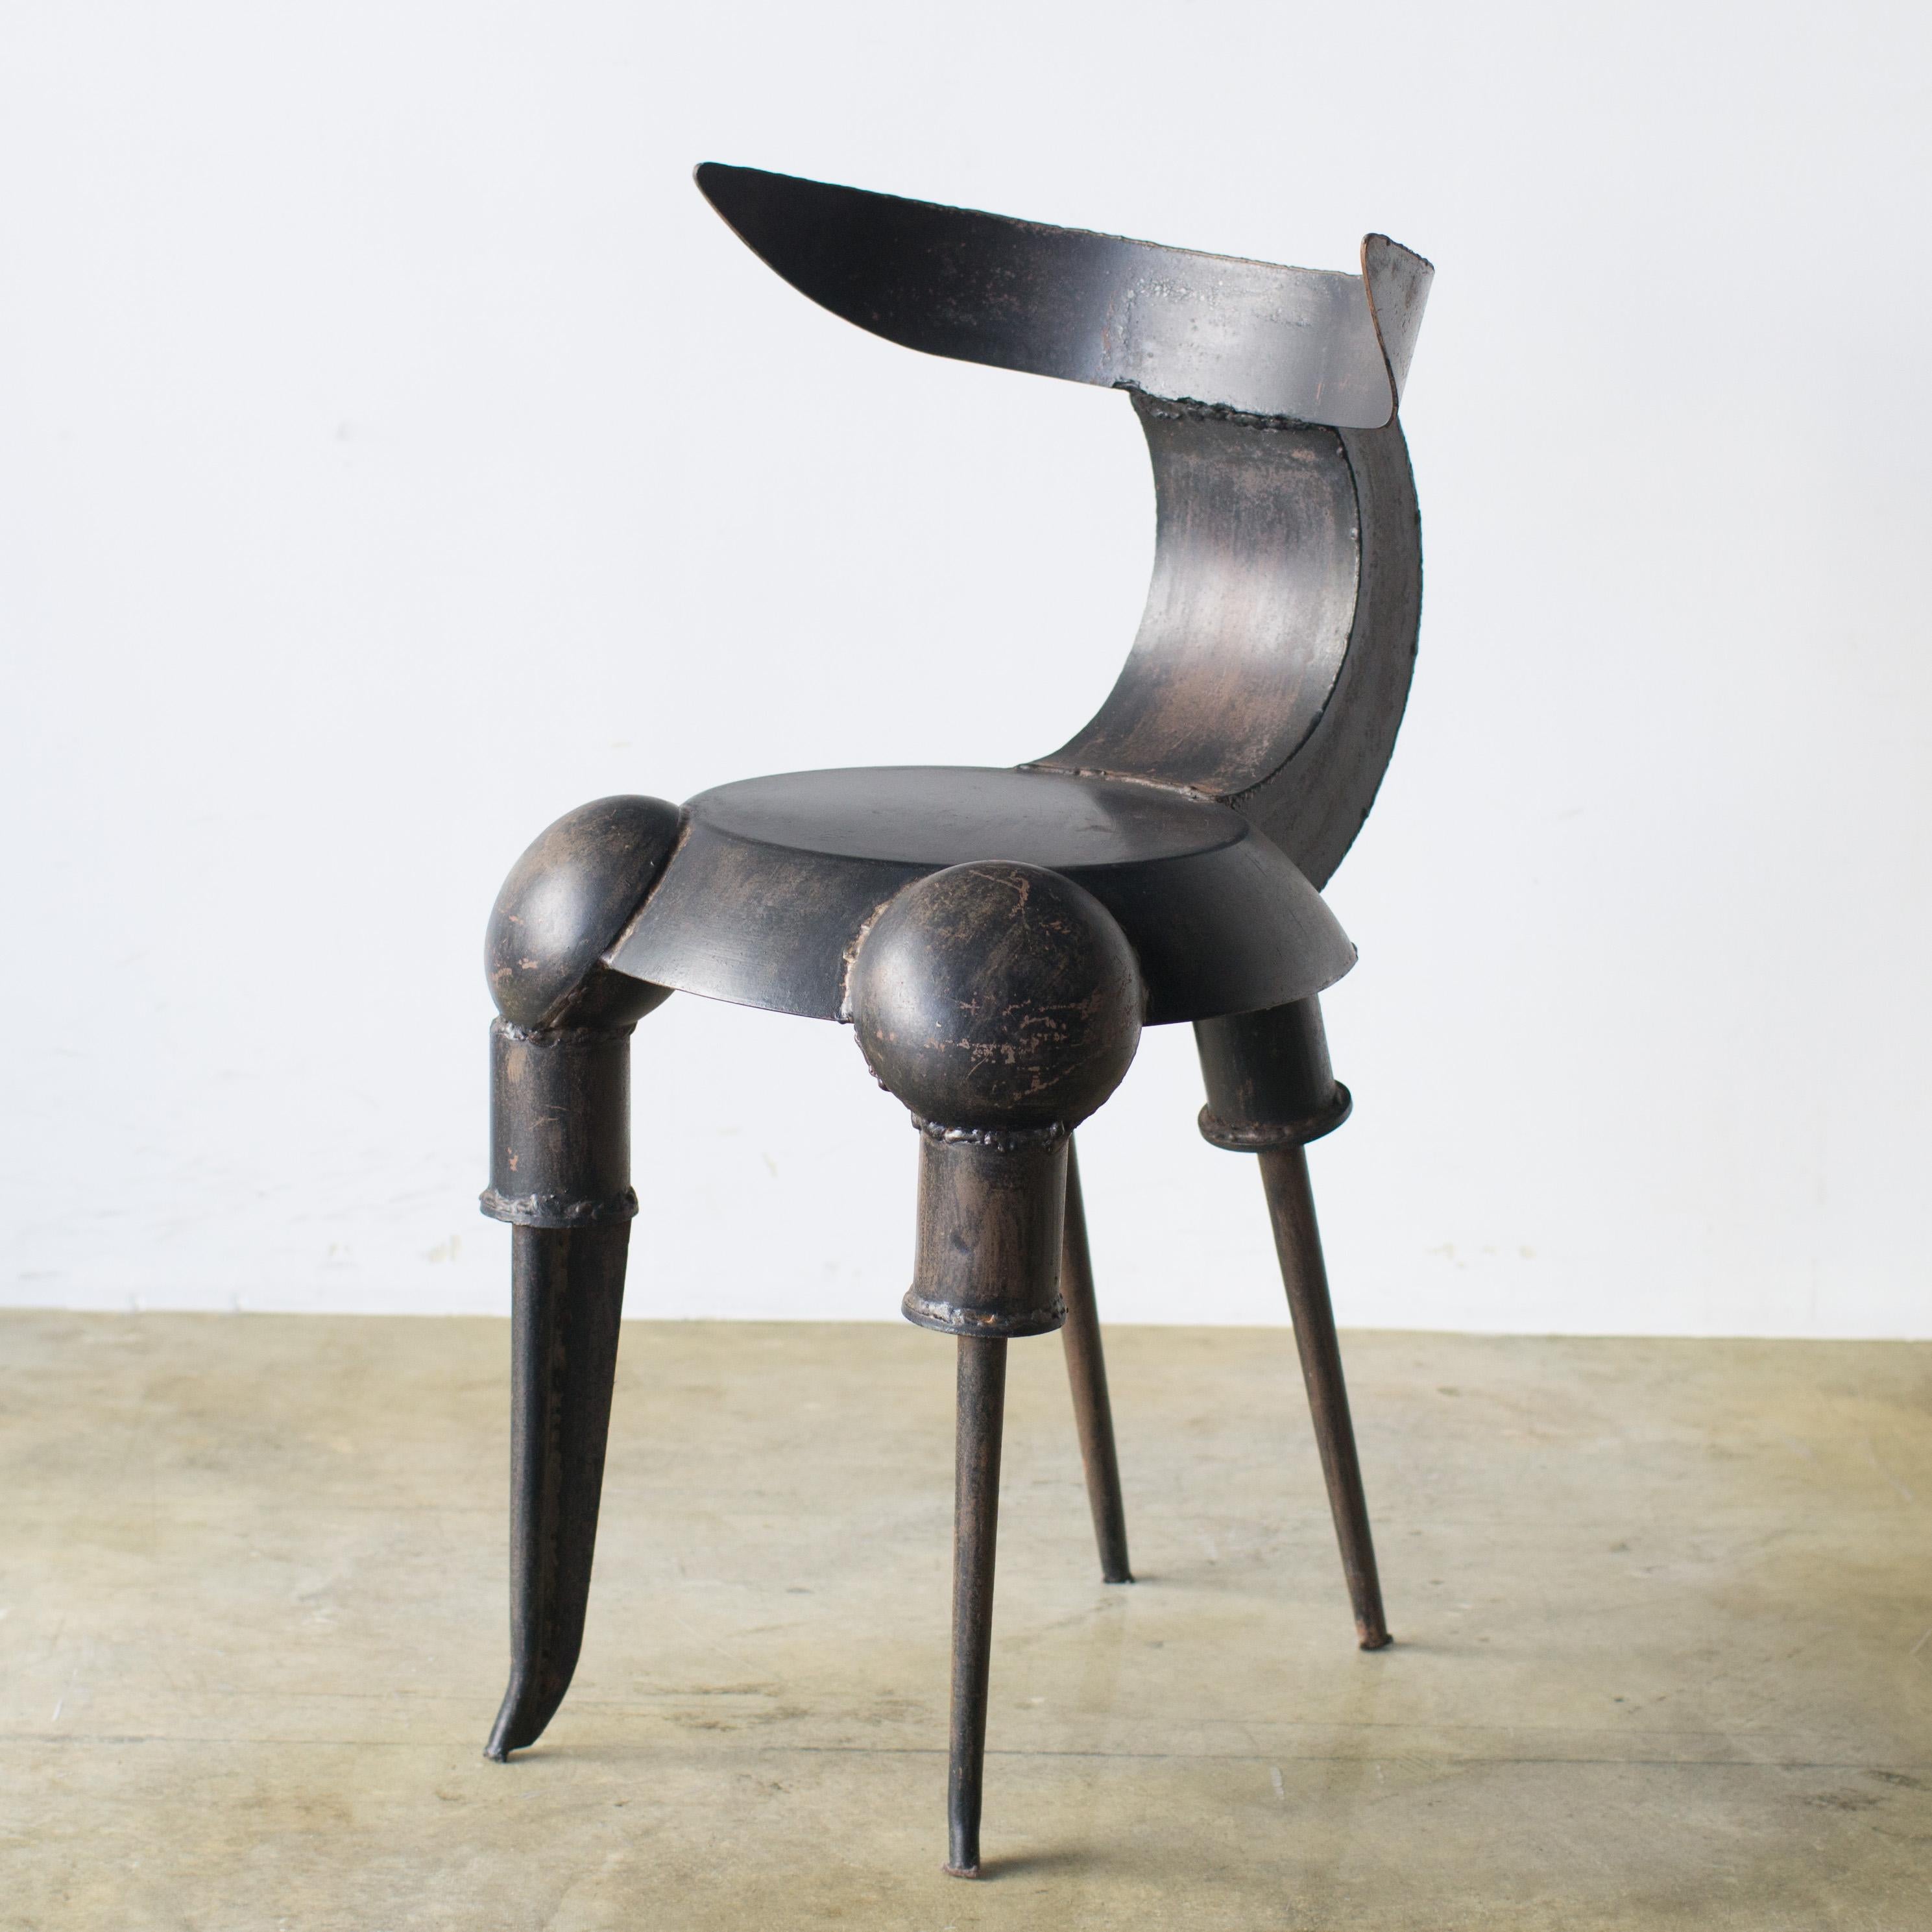 Kitchen chair designed by Tom Dixon. This chair was made of flying pan and Chinese ladle. So named Kitchen chair. One of representing chair of designers early works. Also one of historical design piece in creative salvage movement in the 80s UK.